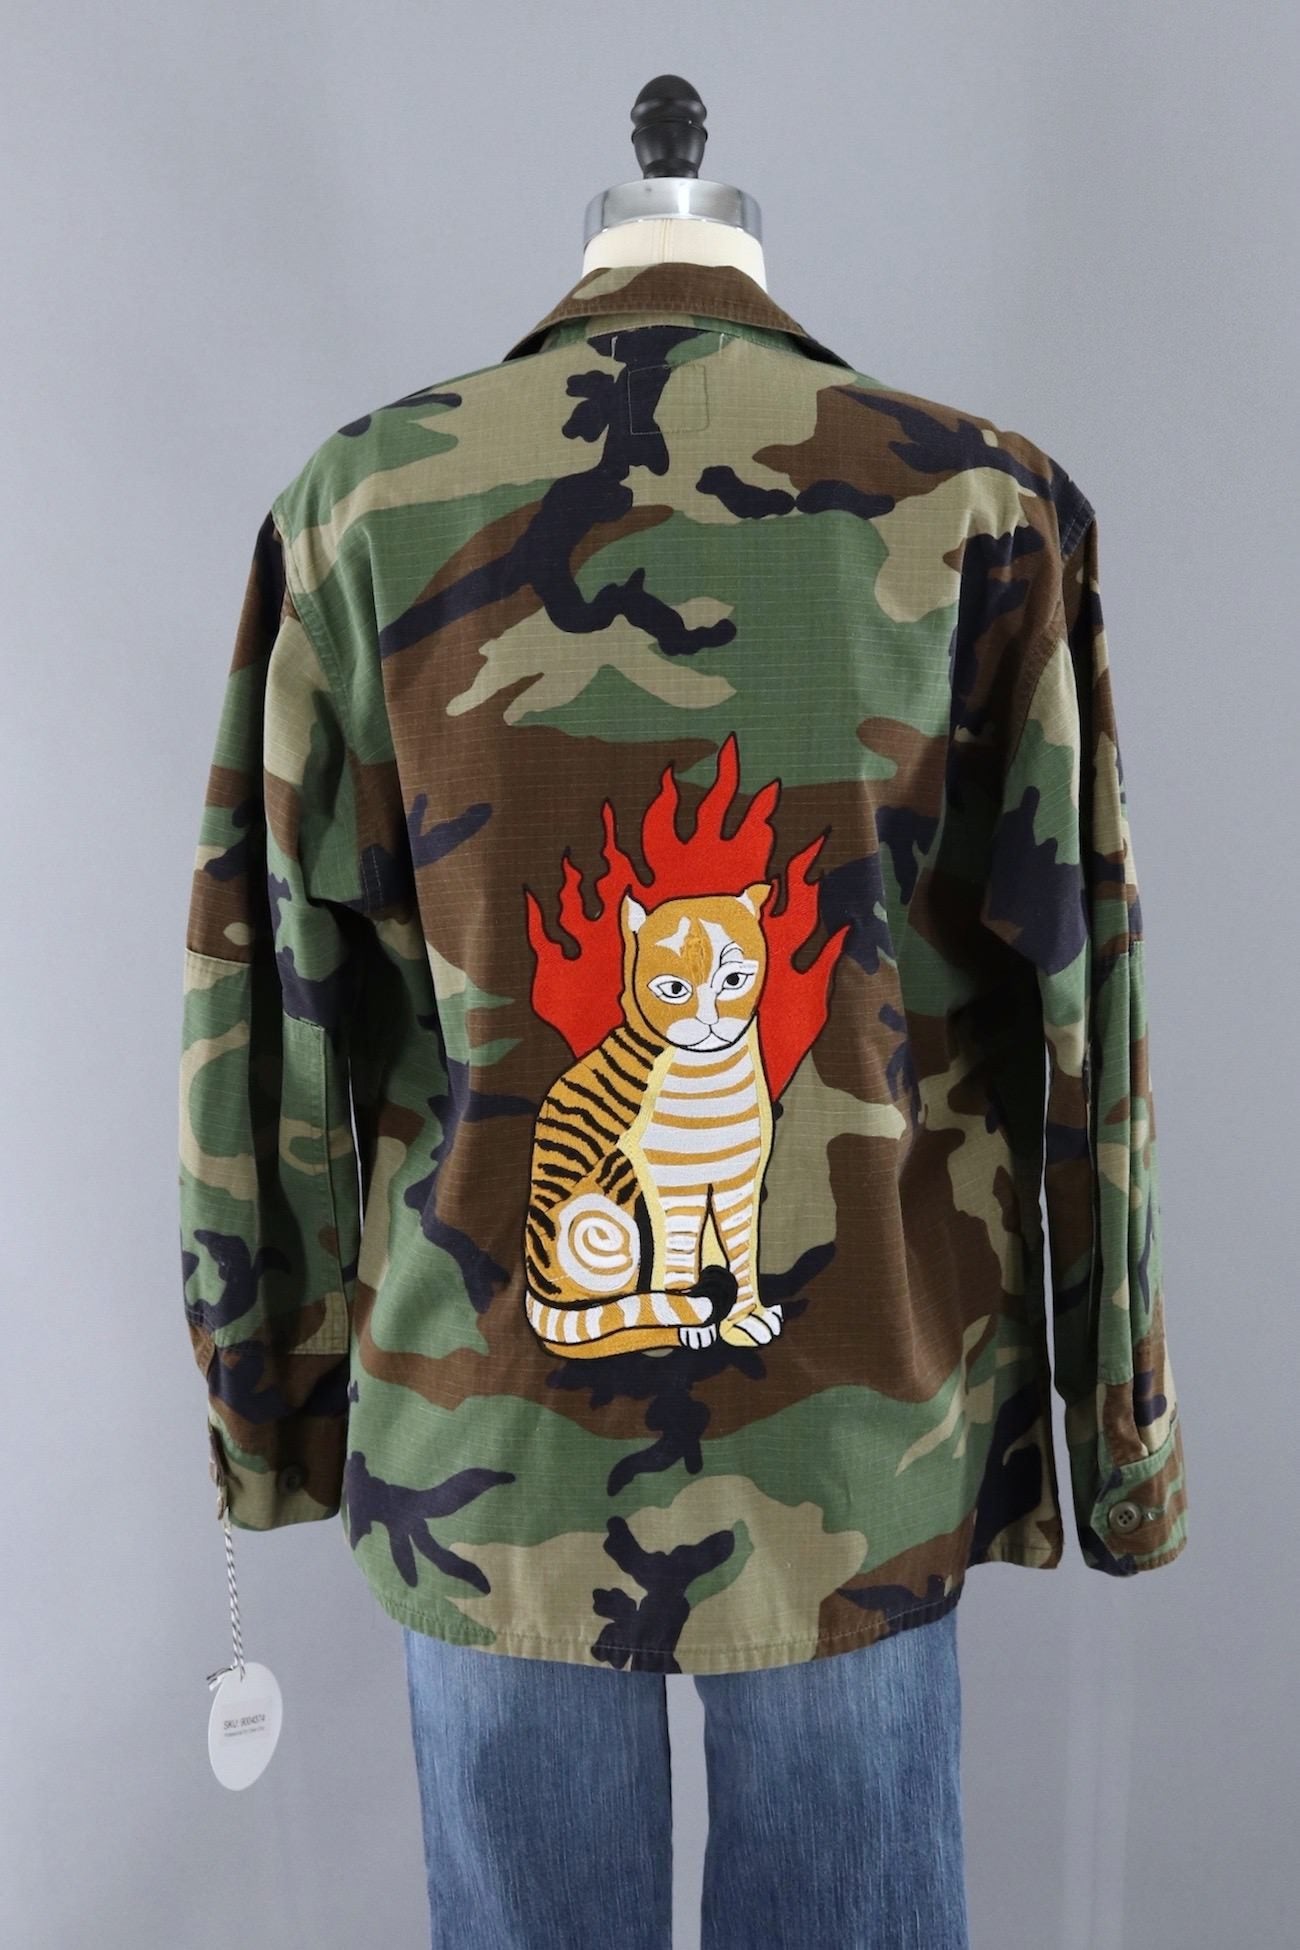 Flaming Cat Embroidered Camouflage Jacket-ThisBlueBird - Modern Vintage